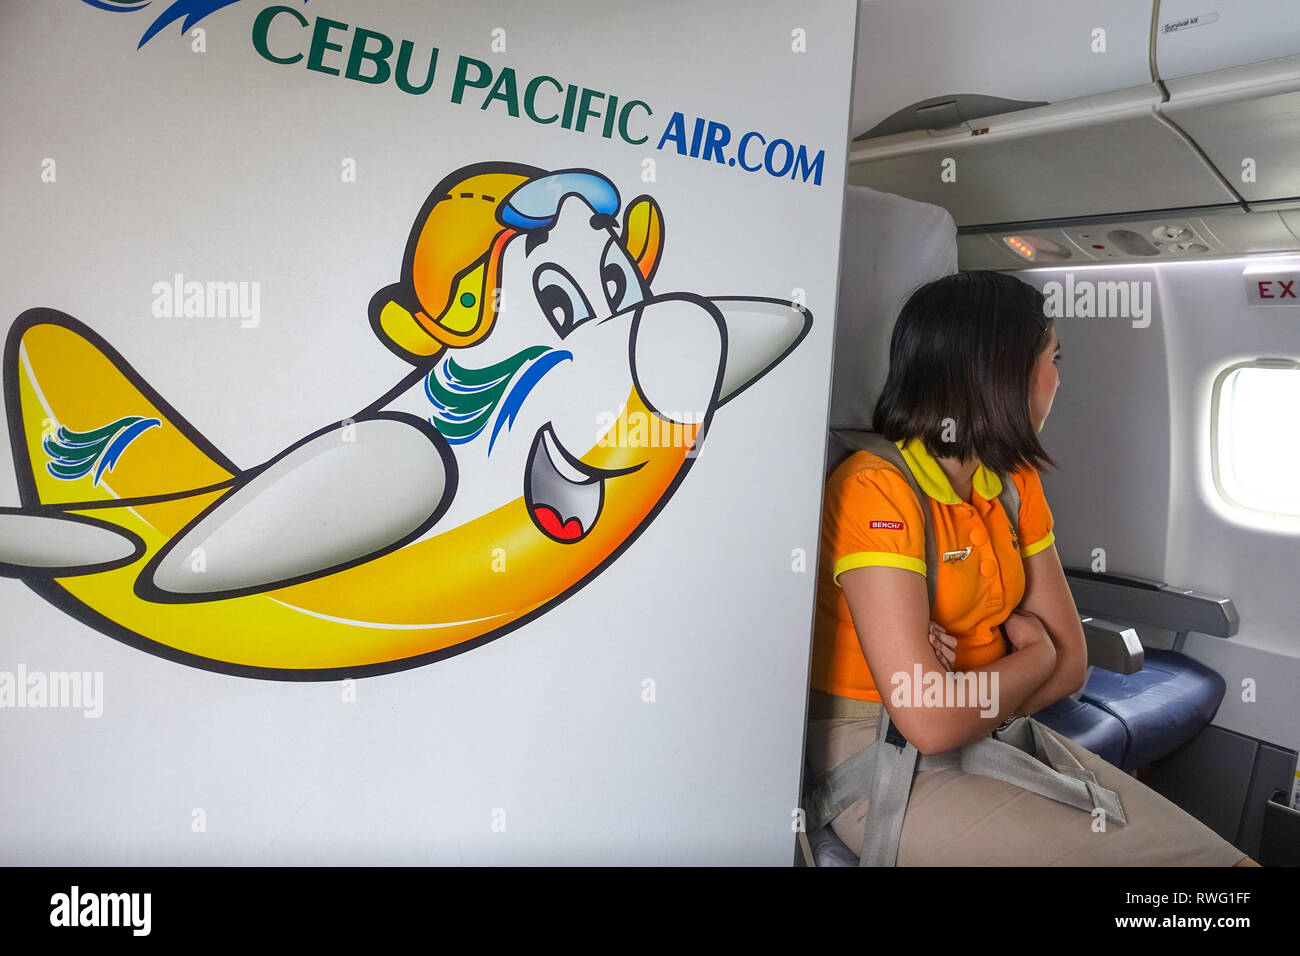 Young Flight Attendant Woman in Plane Window Seat, With Cebu Pacific Airline Logo Stock Photo